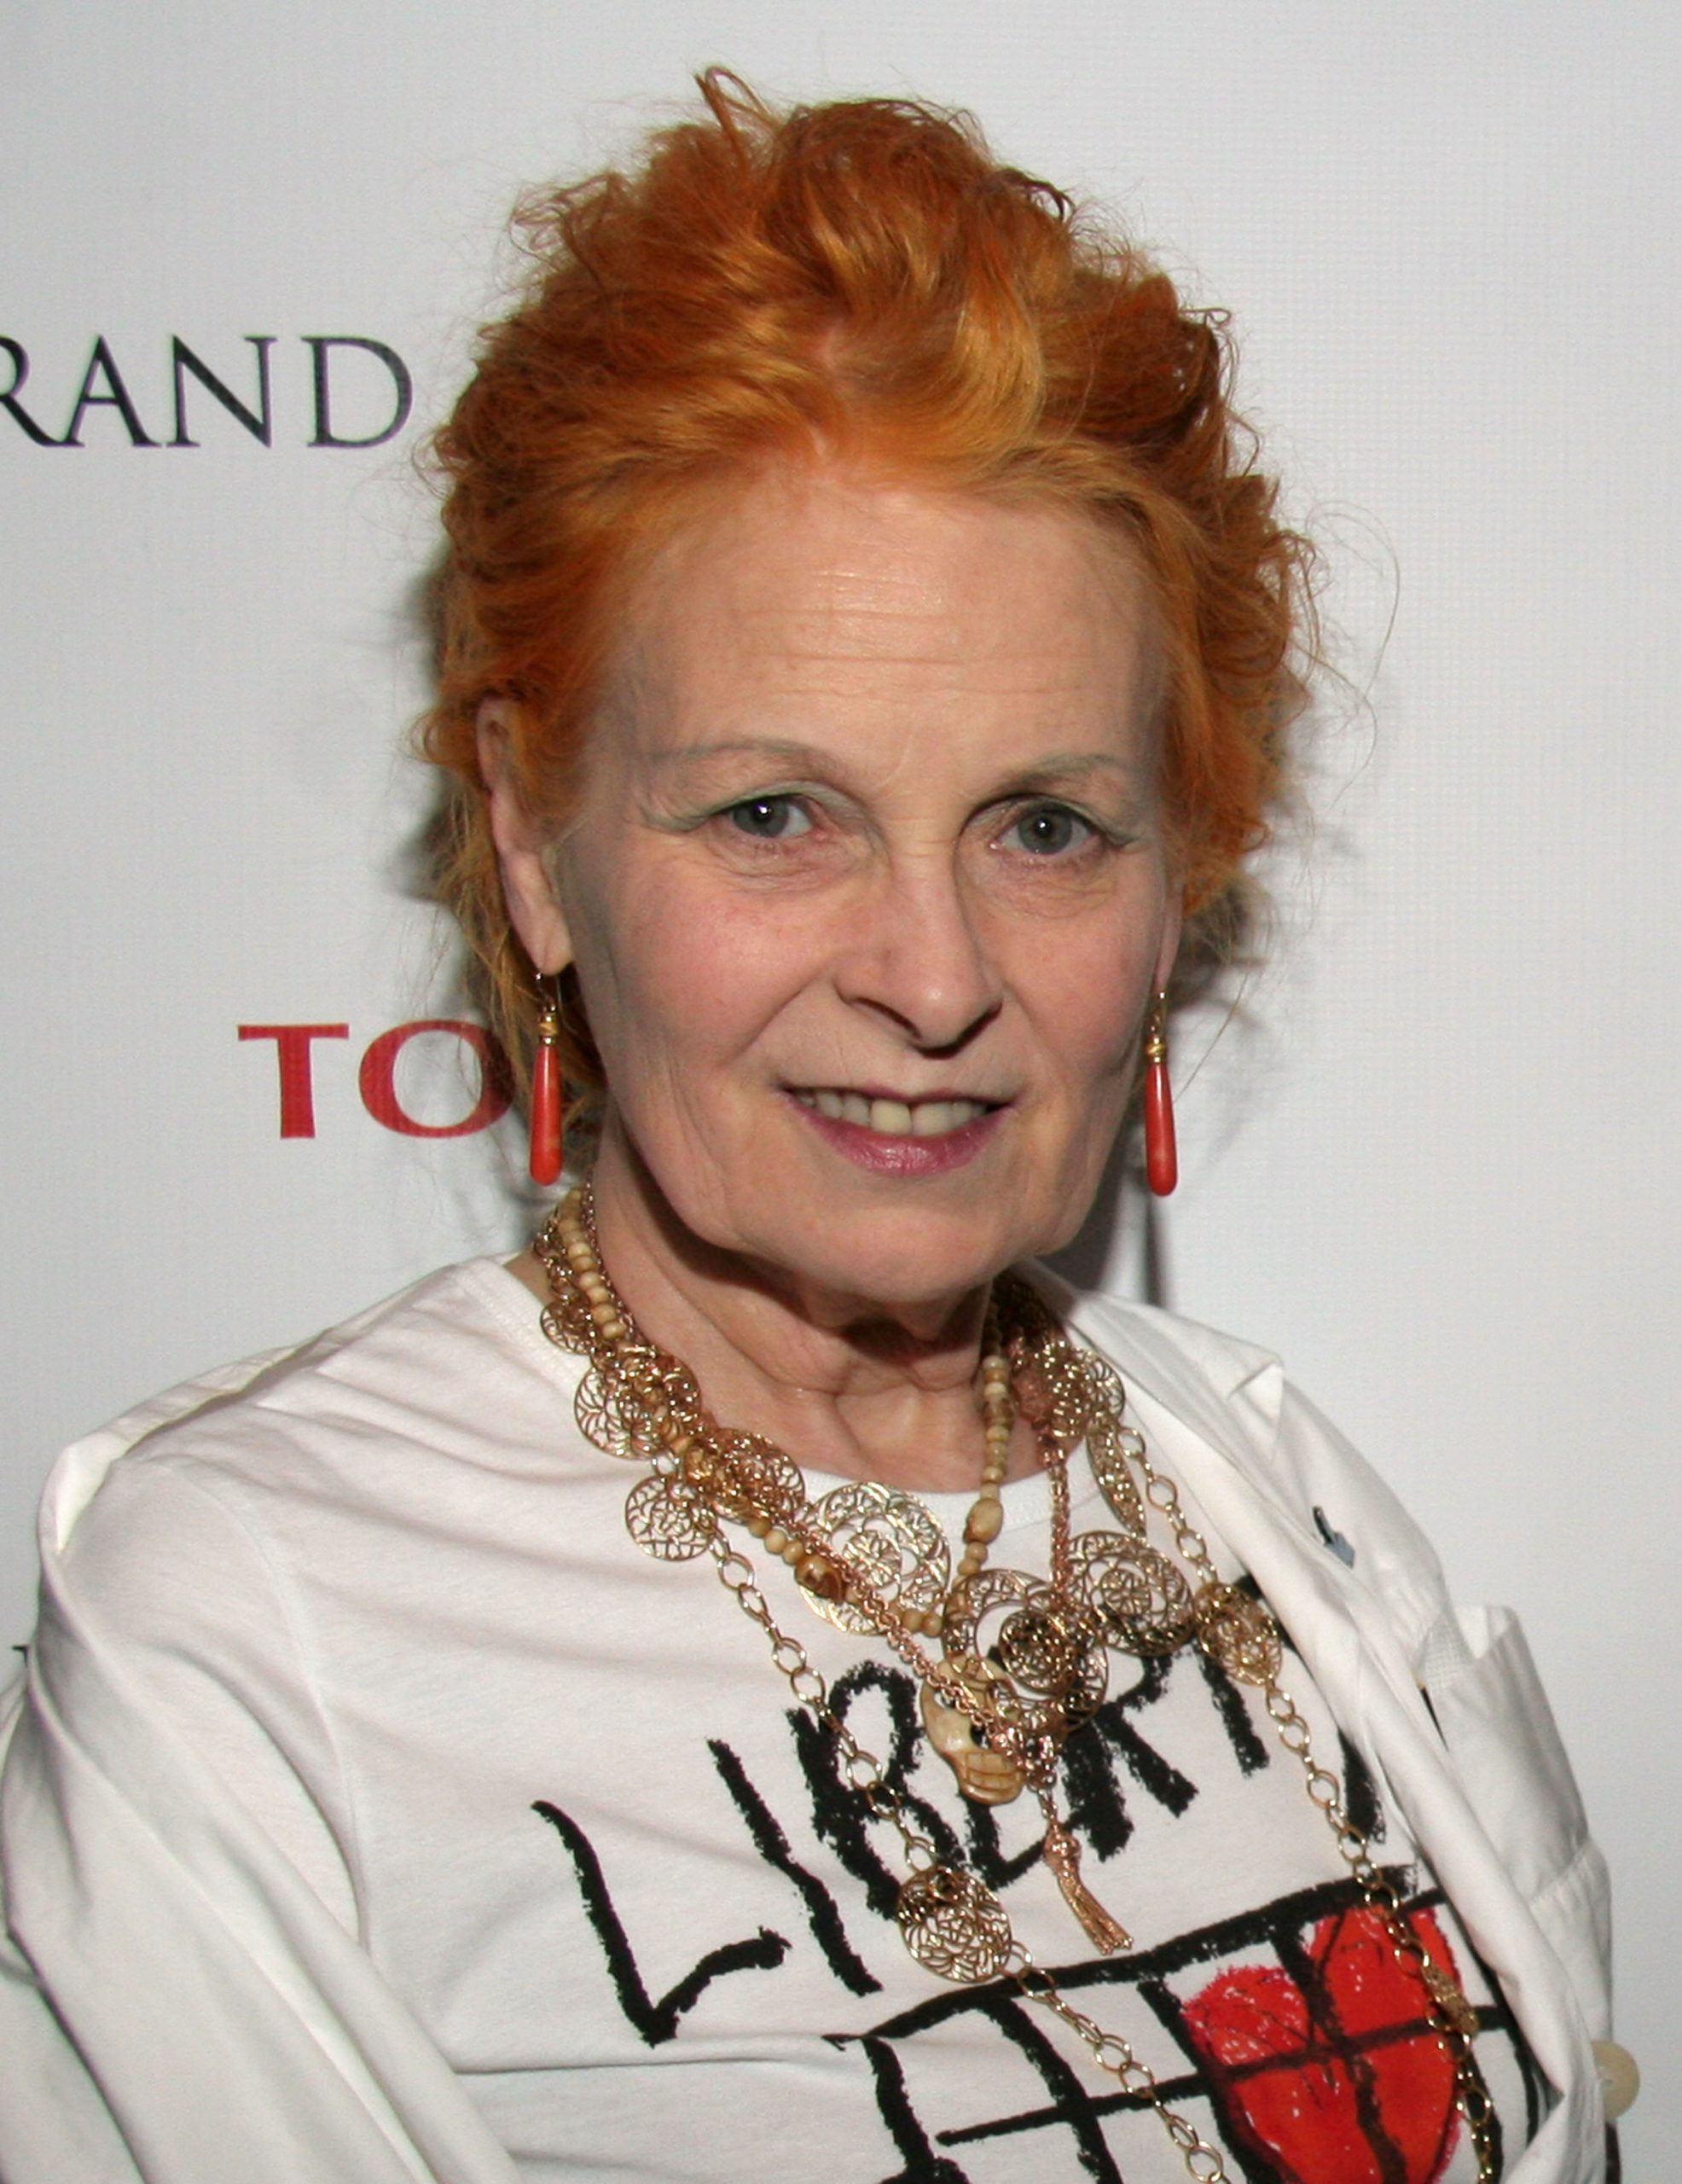 GRAND CLASSICS: Films With Style Screening Of "Incident At Oglala" Hosted By Vivienne Westwood